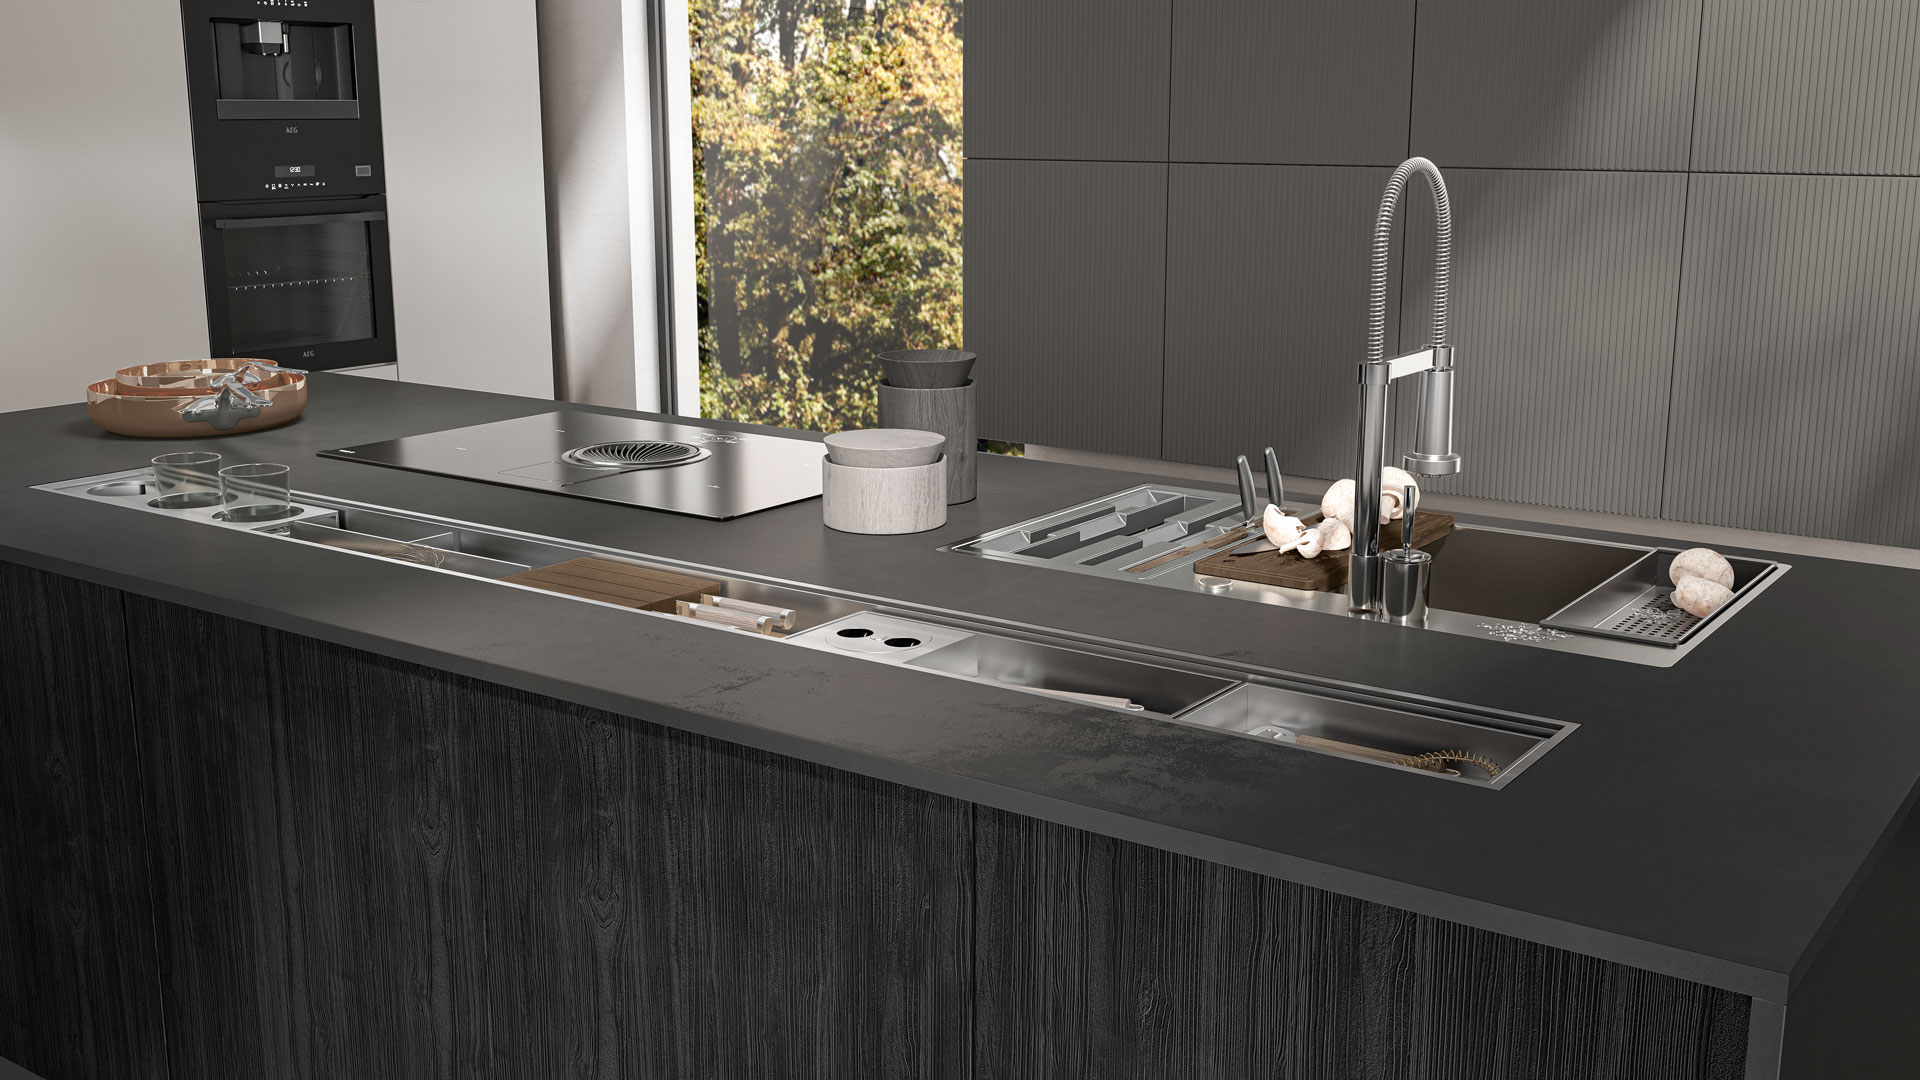 Choosing the Right Type of Sink for Your Kitchen